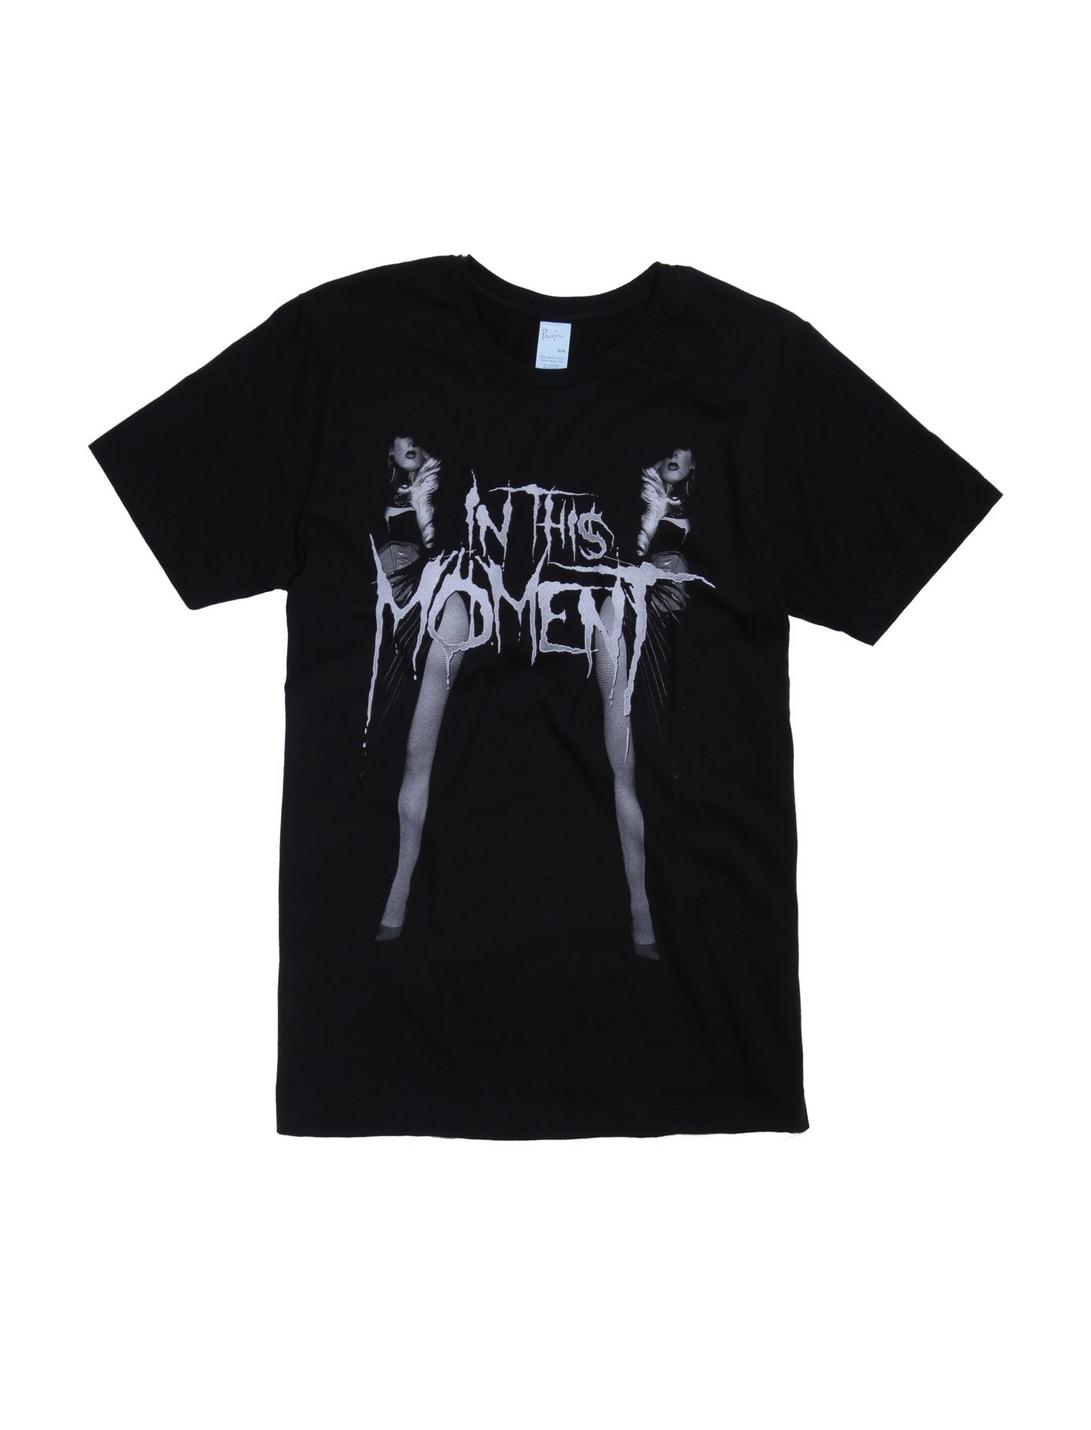 In This Moment Black Widow Leg Mirrored T-Shirt, BLACK, hi-res